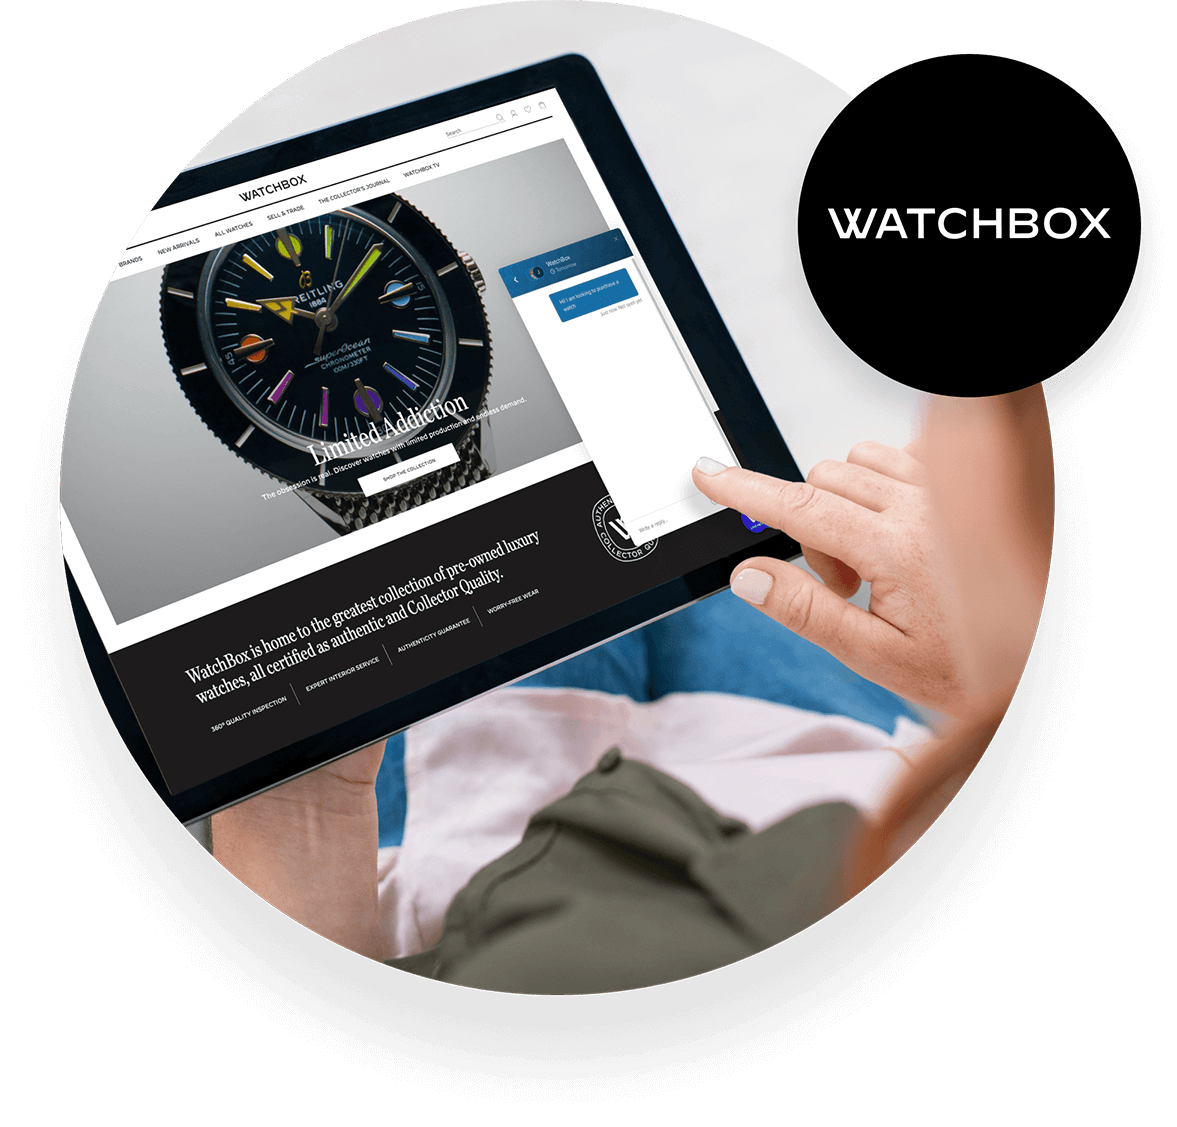 Watchbox logo and woman with tablet